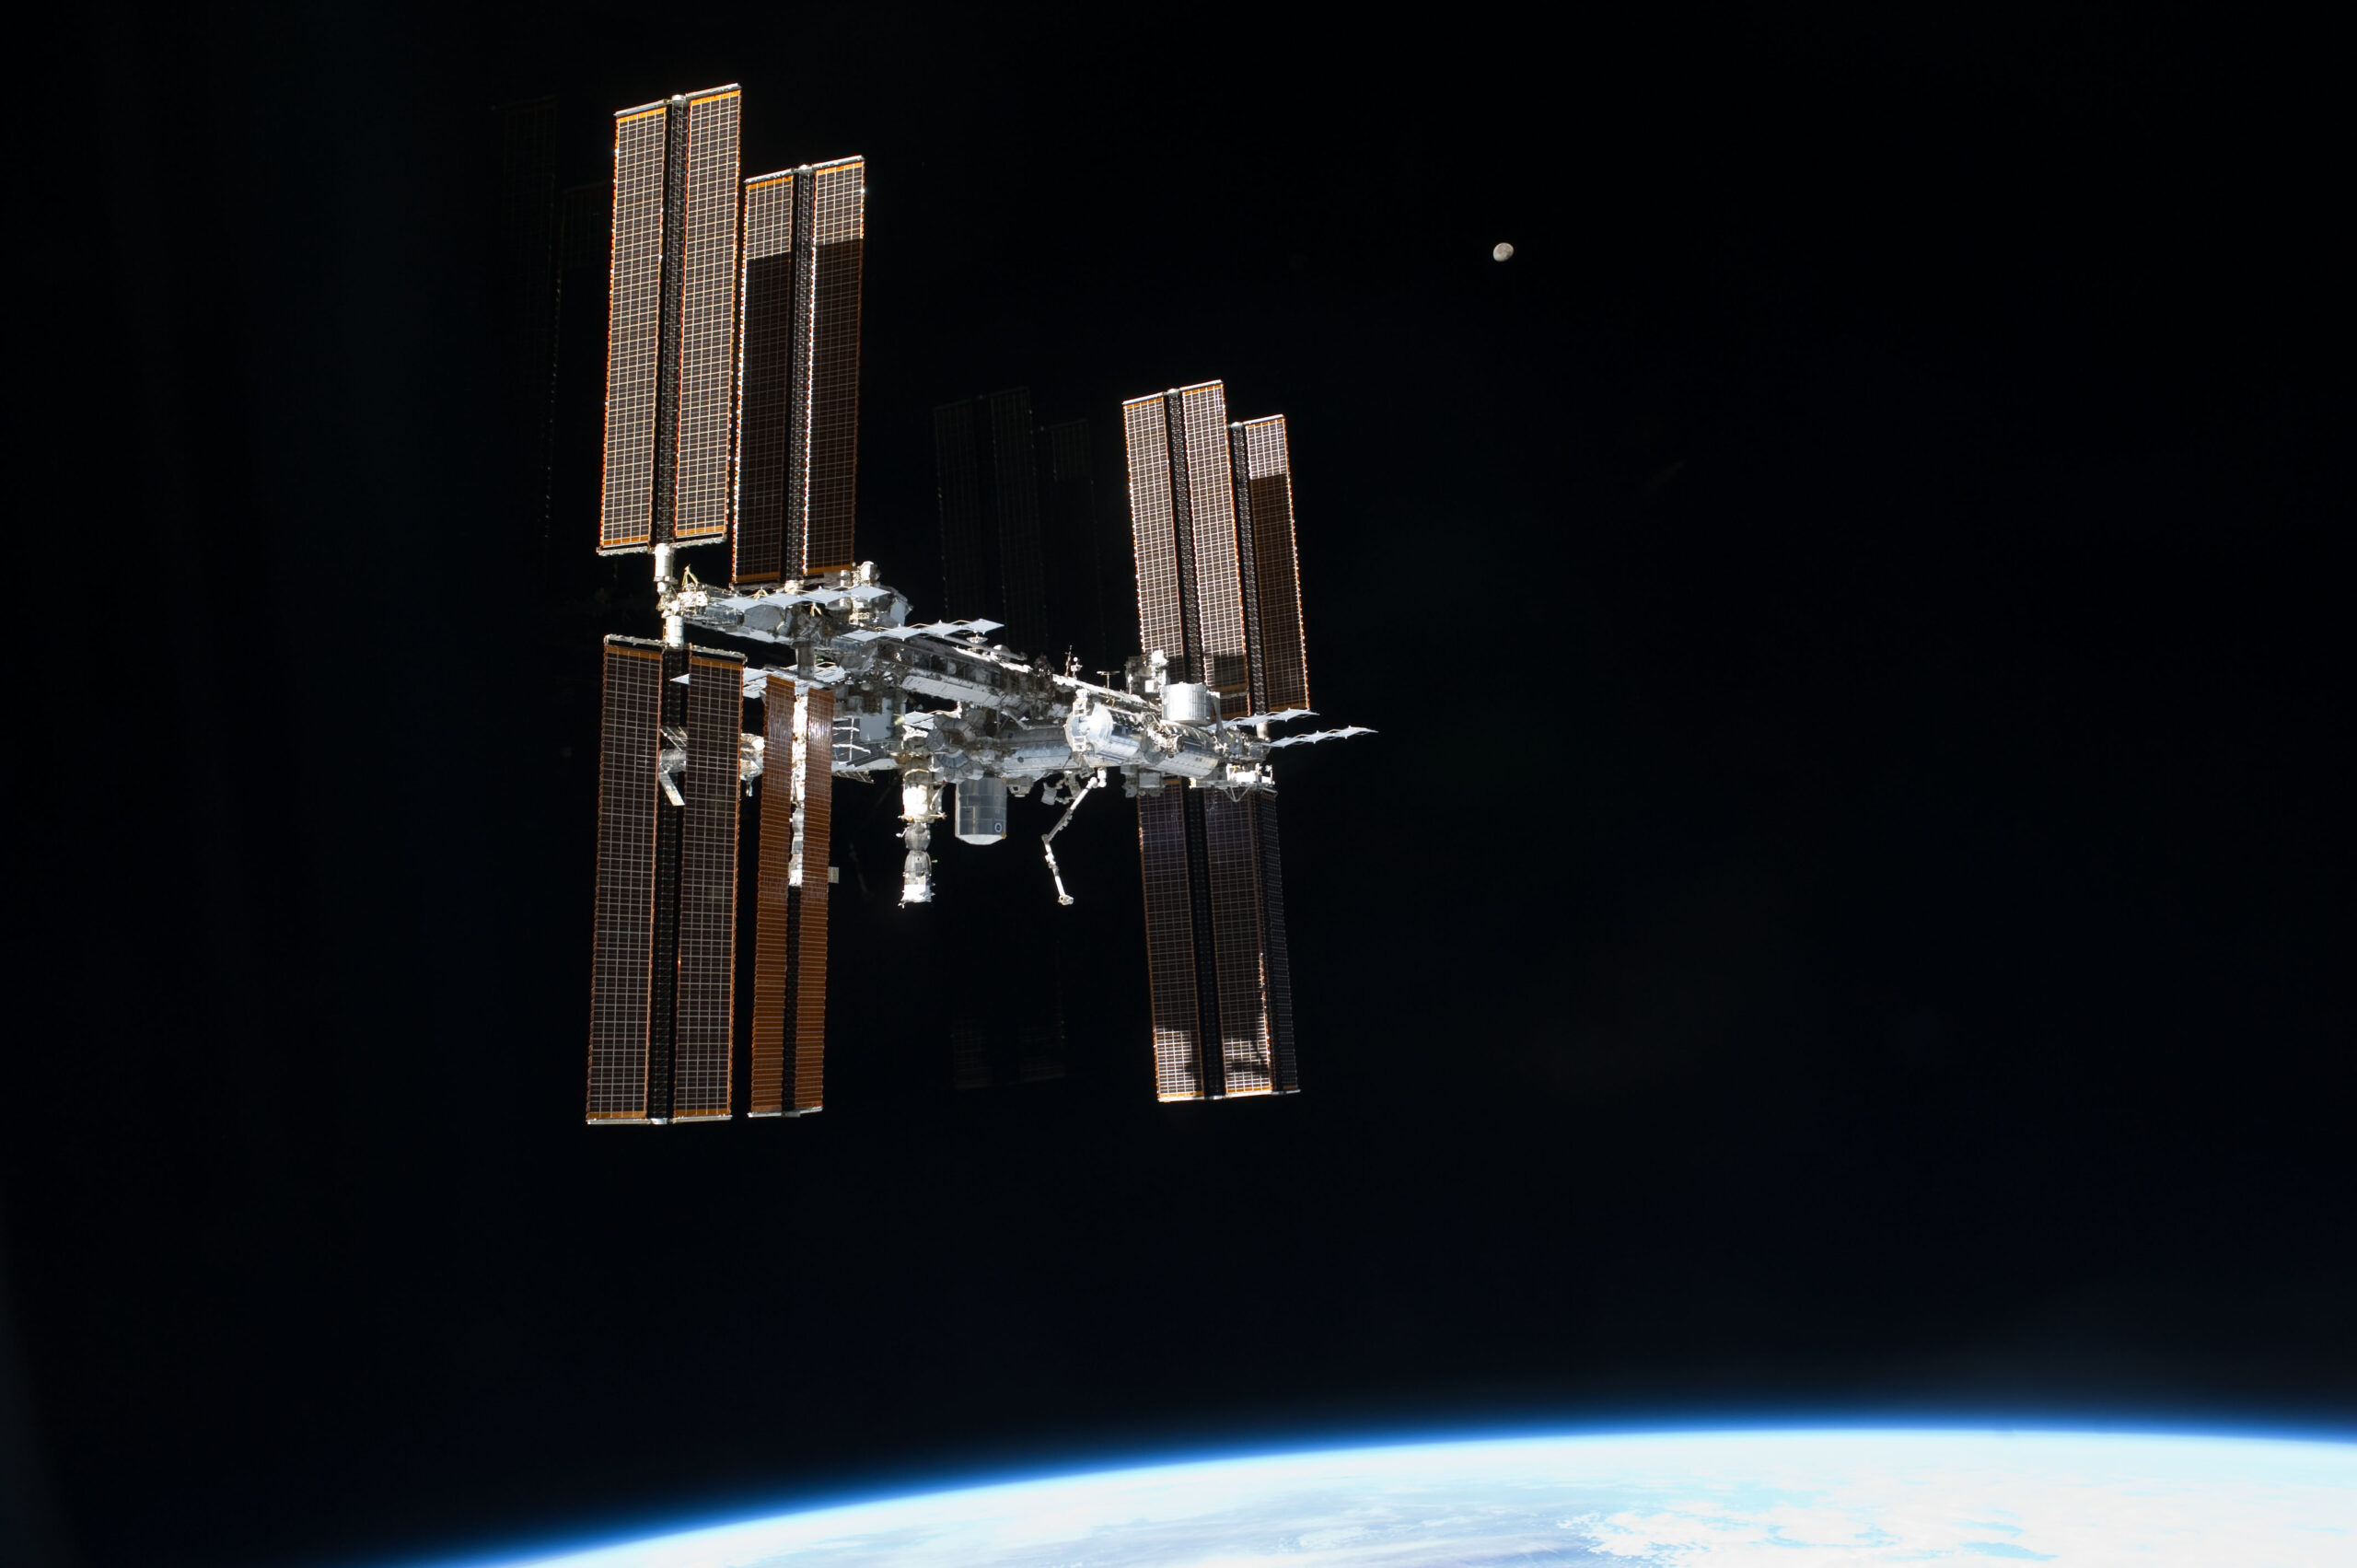 Scientists are trying to figure out which bacteria have colonized our space station